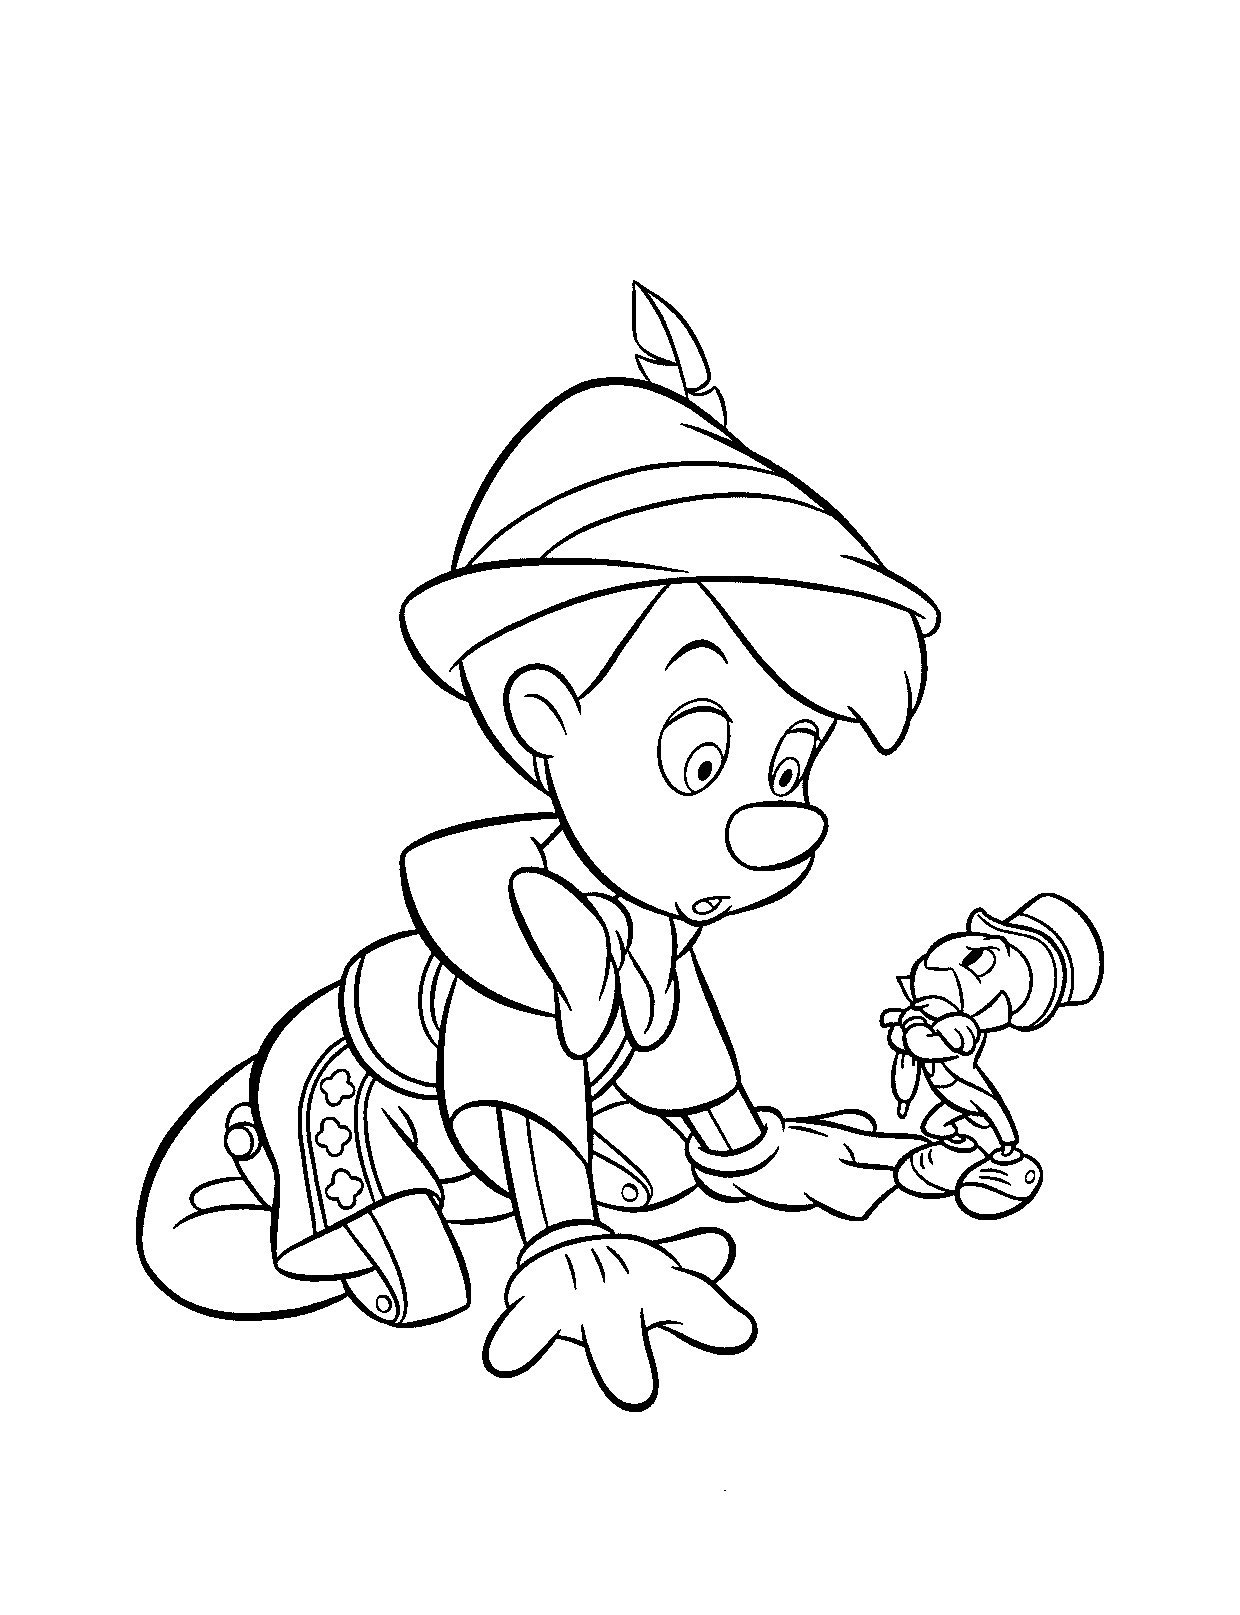 Coloring Sheet For Toddlers
 Free Printable Pinocchio Coloring Pages For Kids